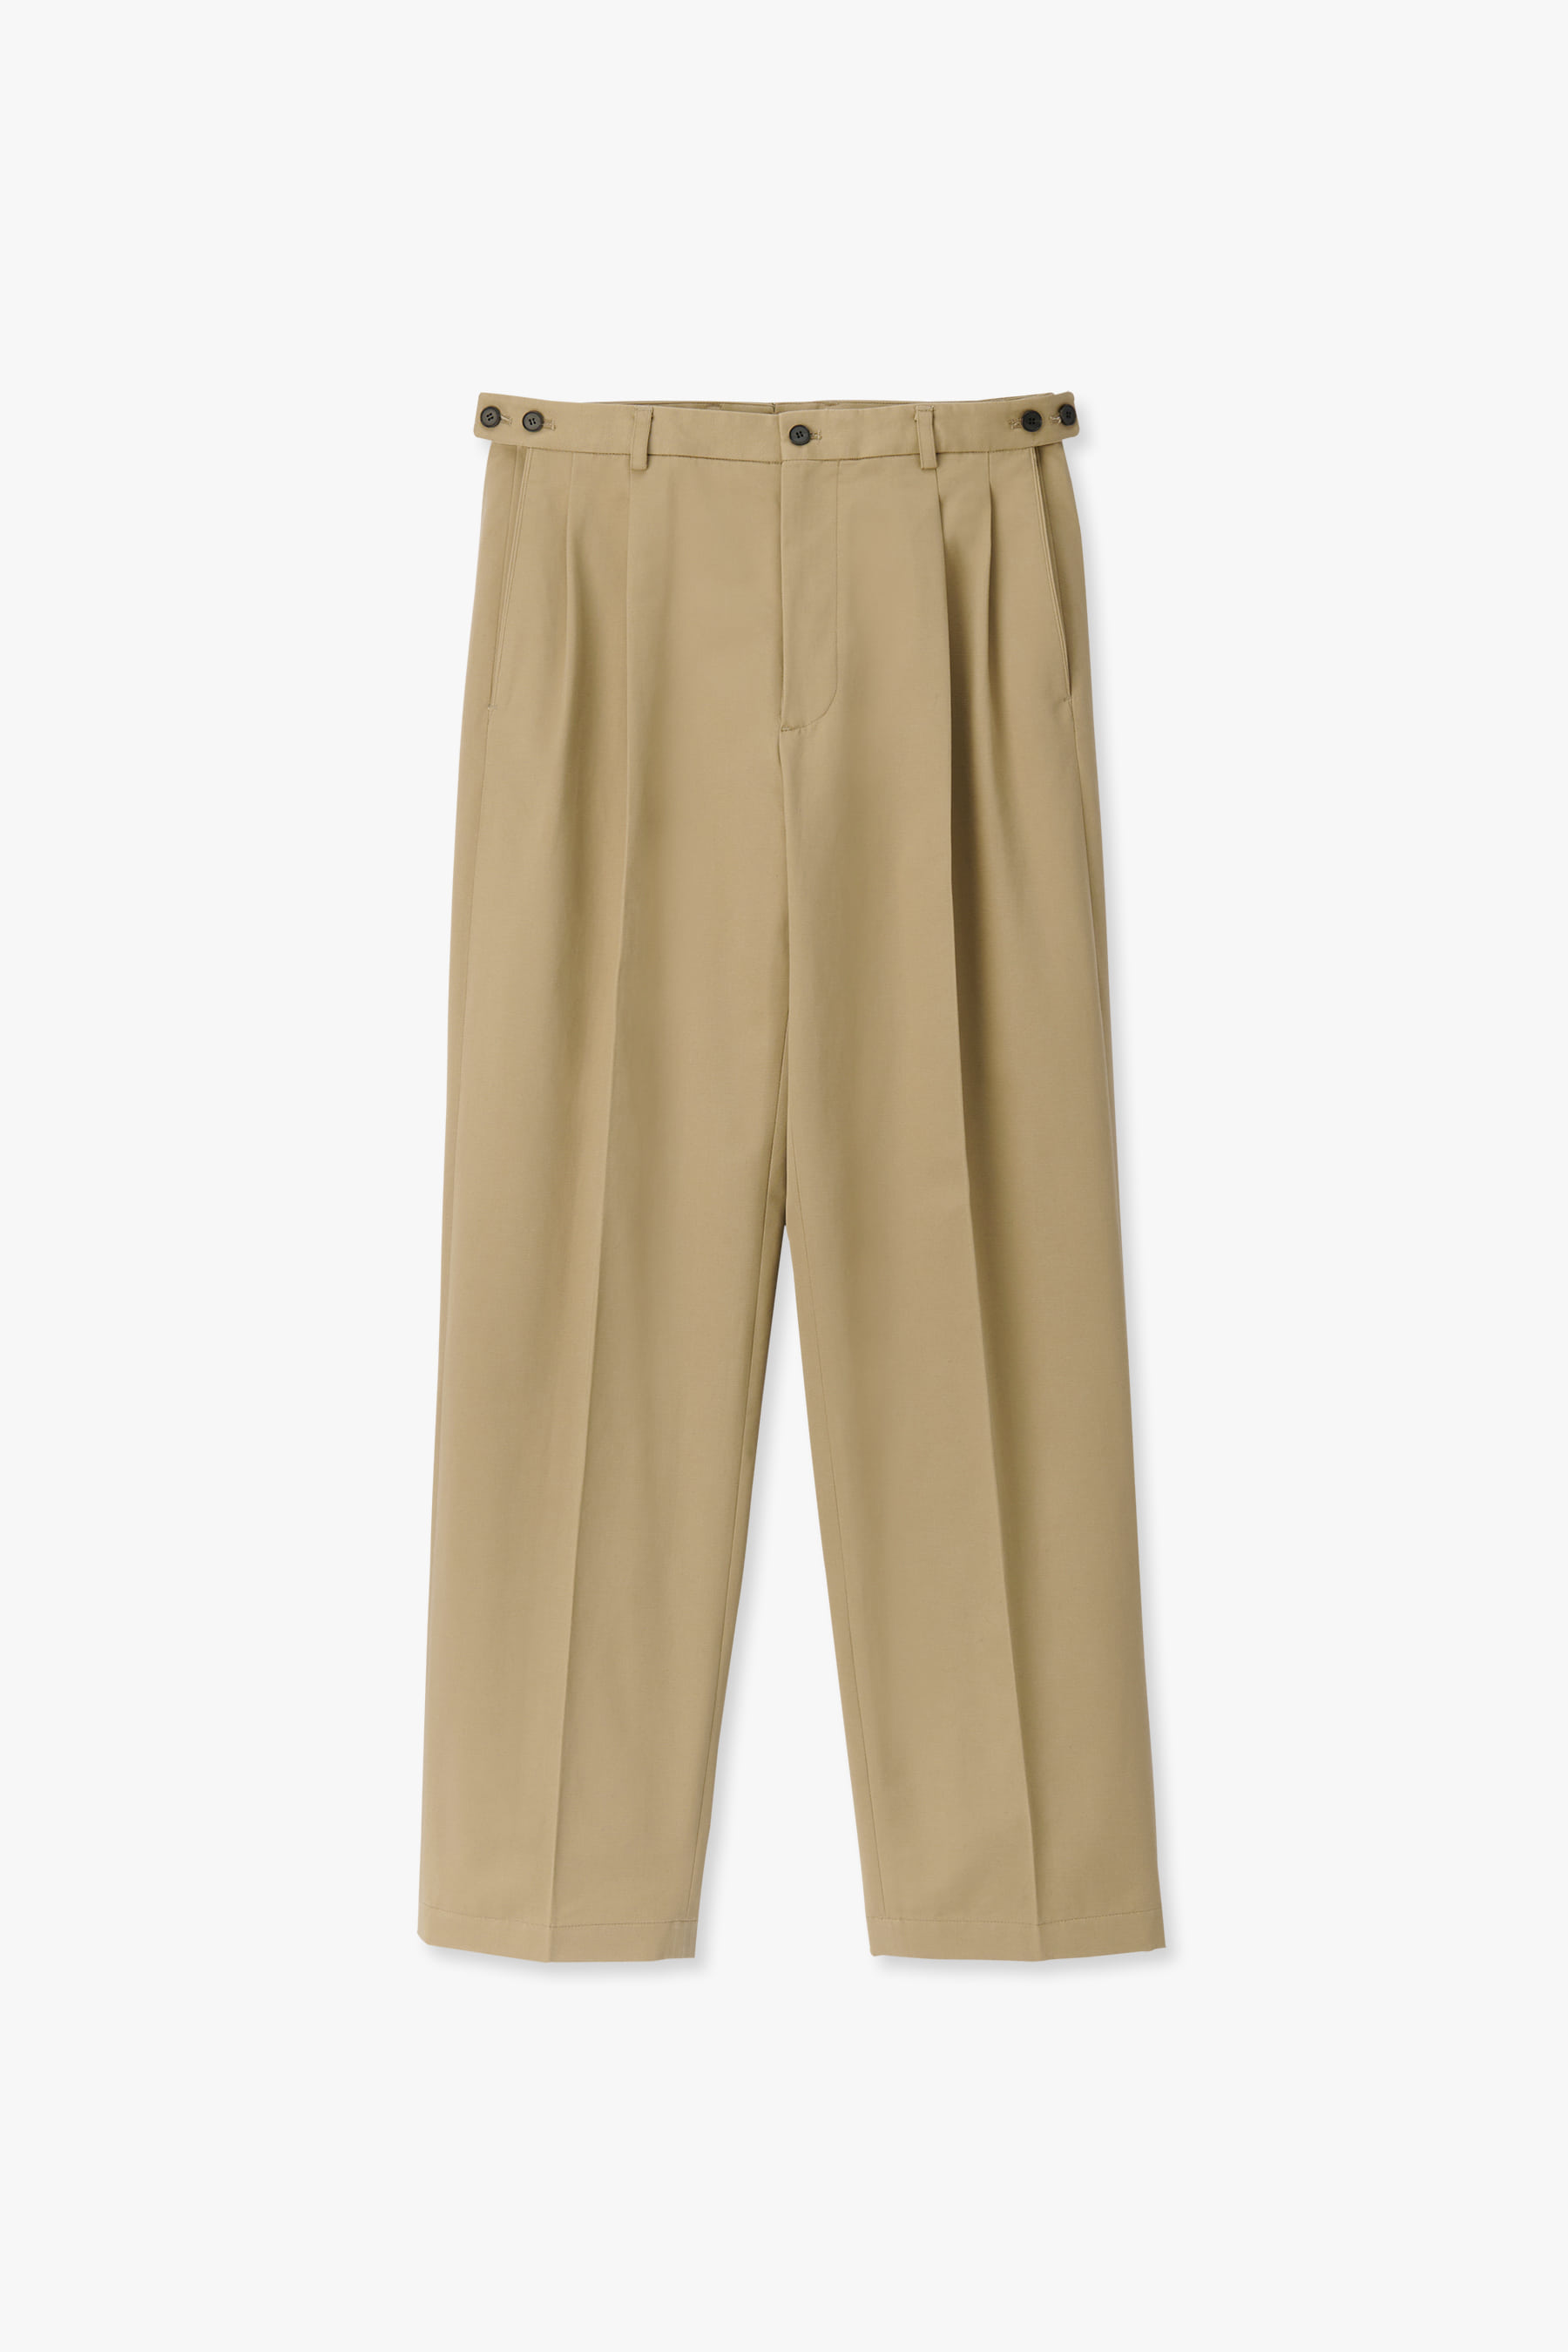 BEIGE BUTTON ADJUSTABLE ROLL UP PANTS